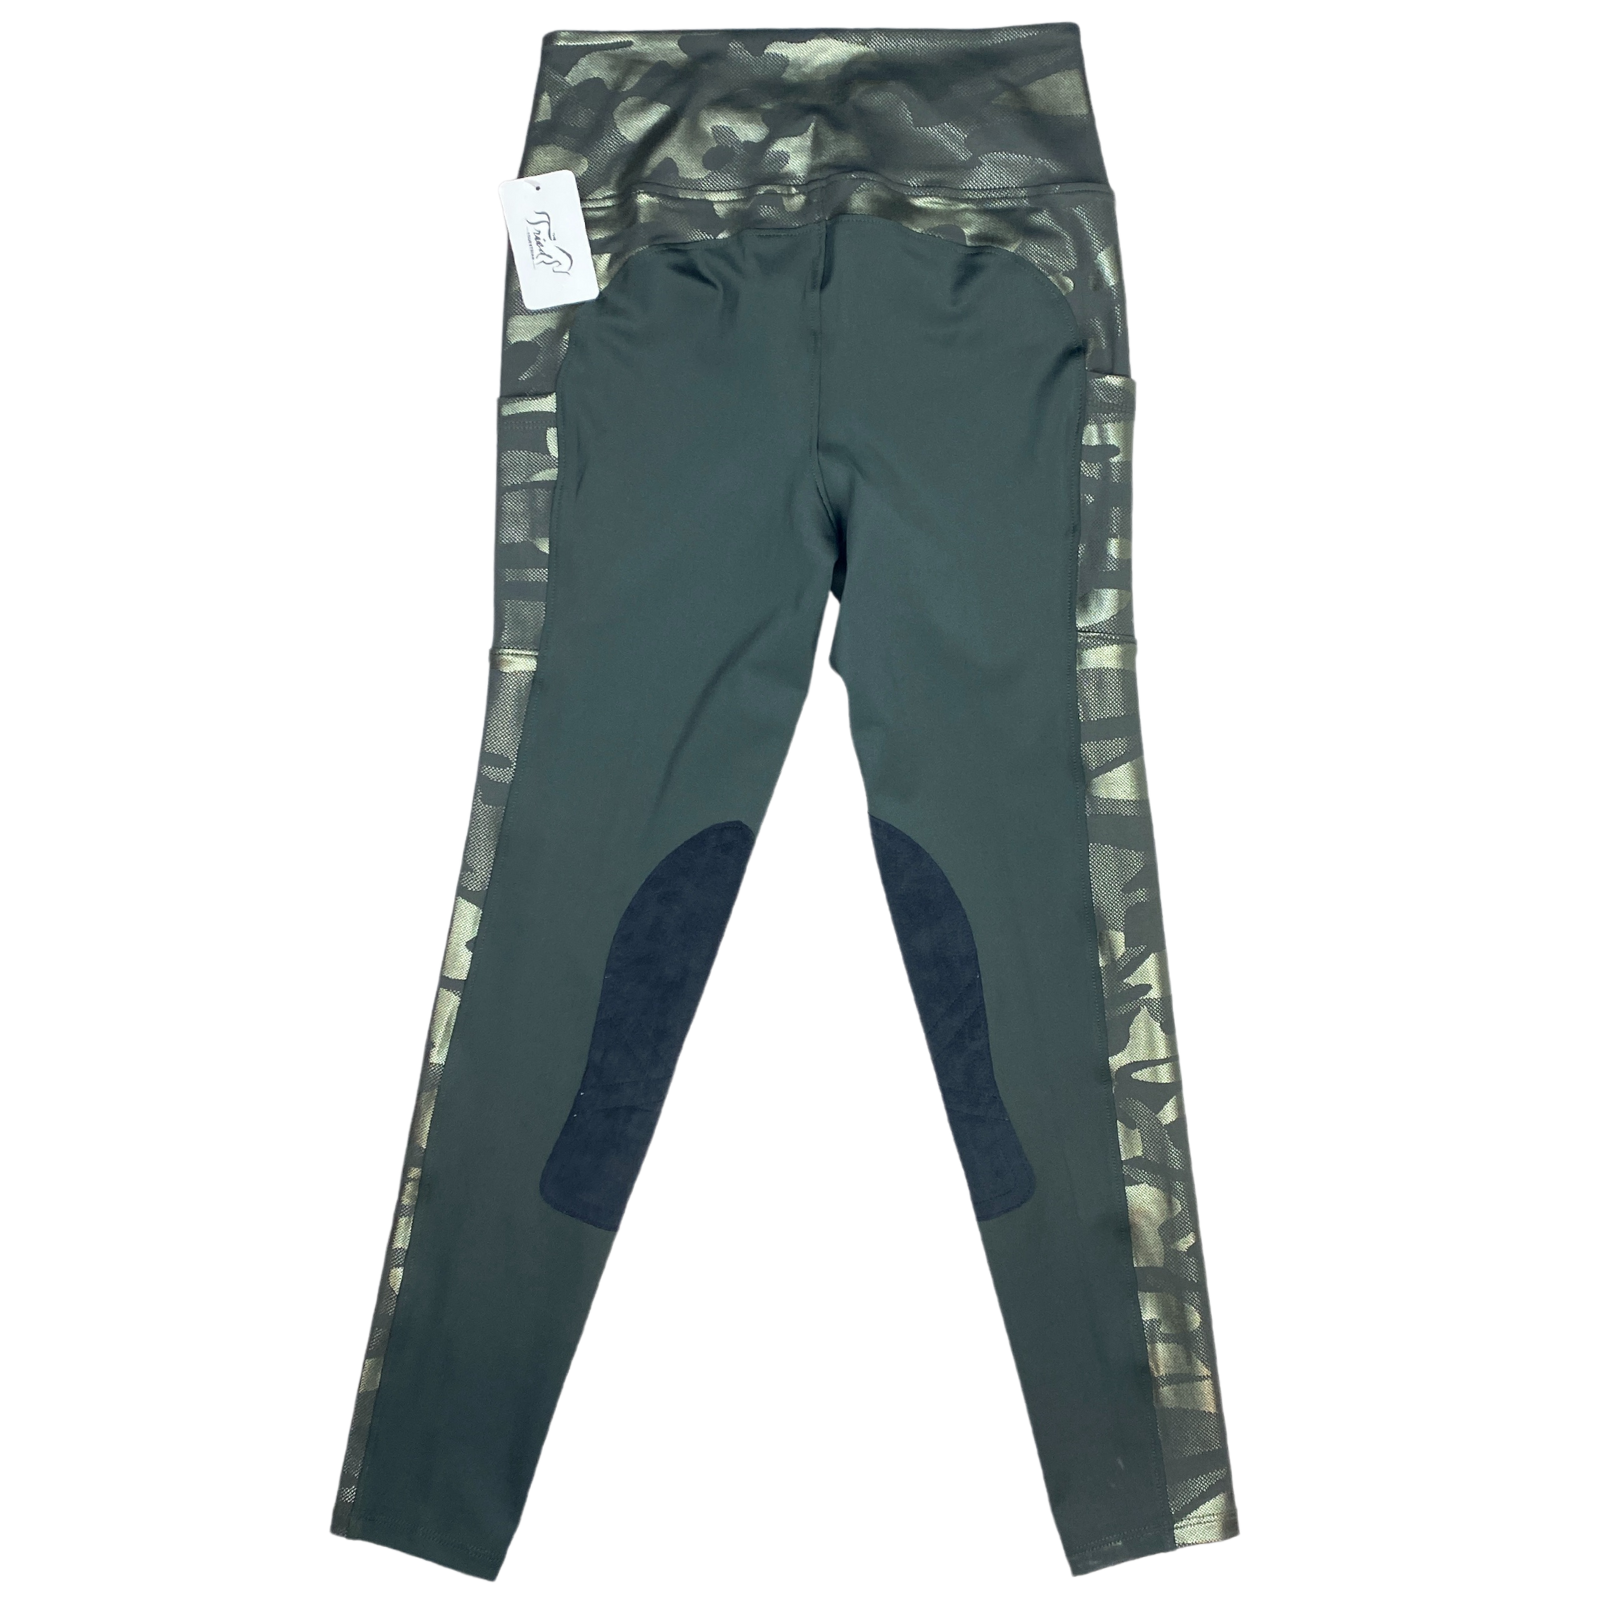 Back of Botori 'Camo' Riding Tights in Olive